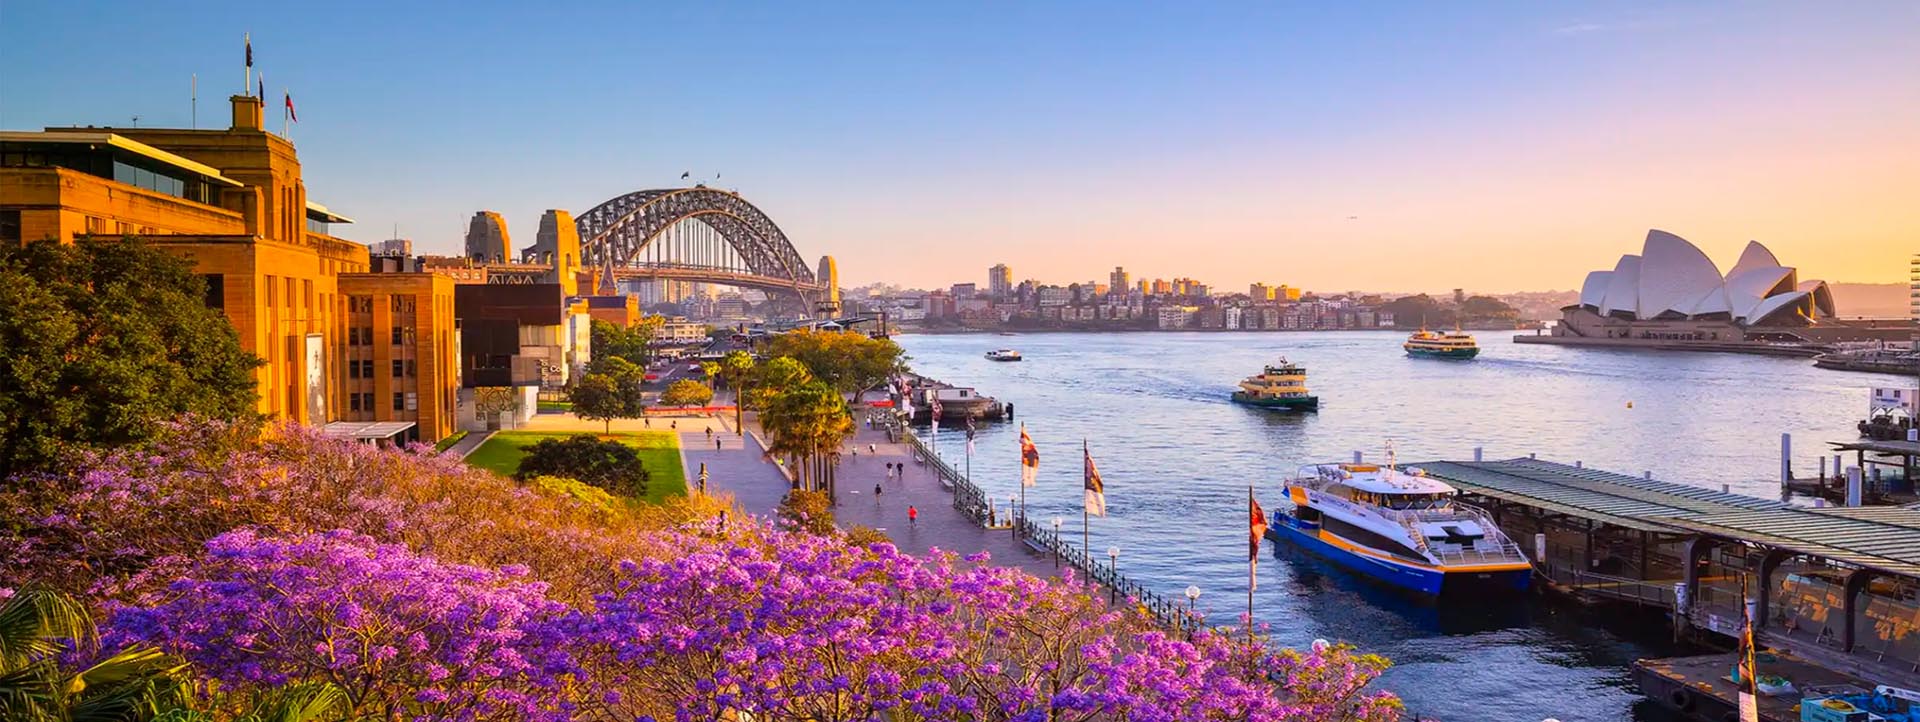 NEW SOUTH WALES TRAVEL THINGS to do Sydney